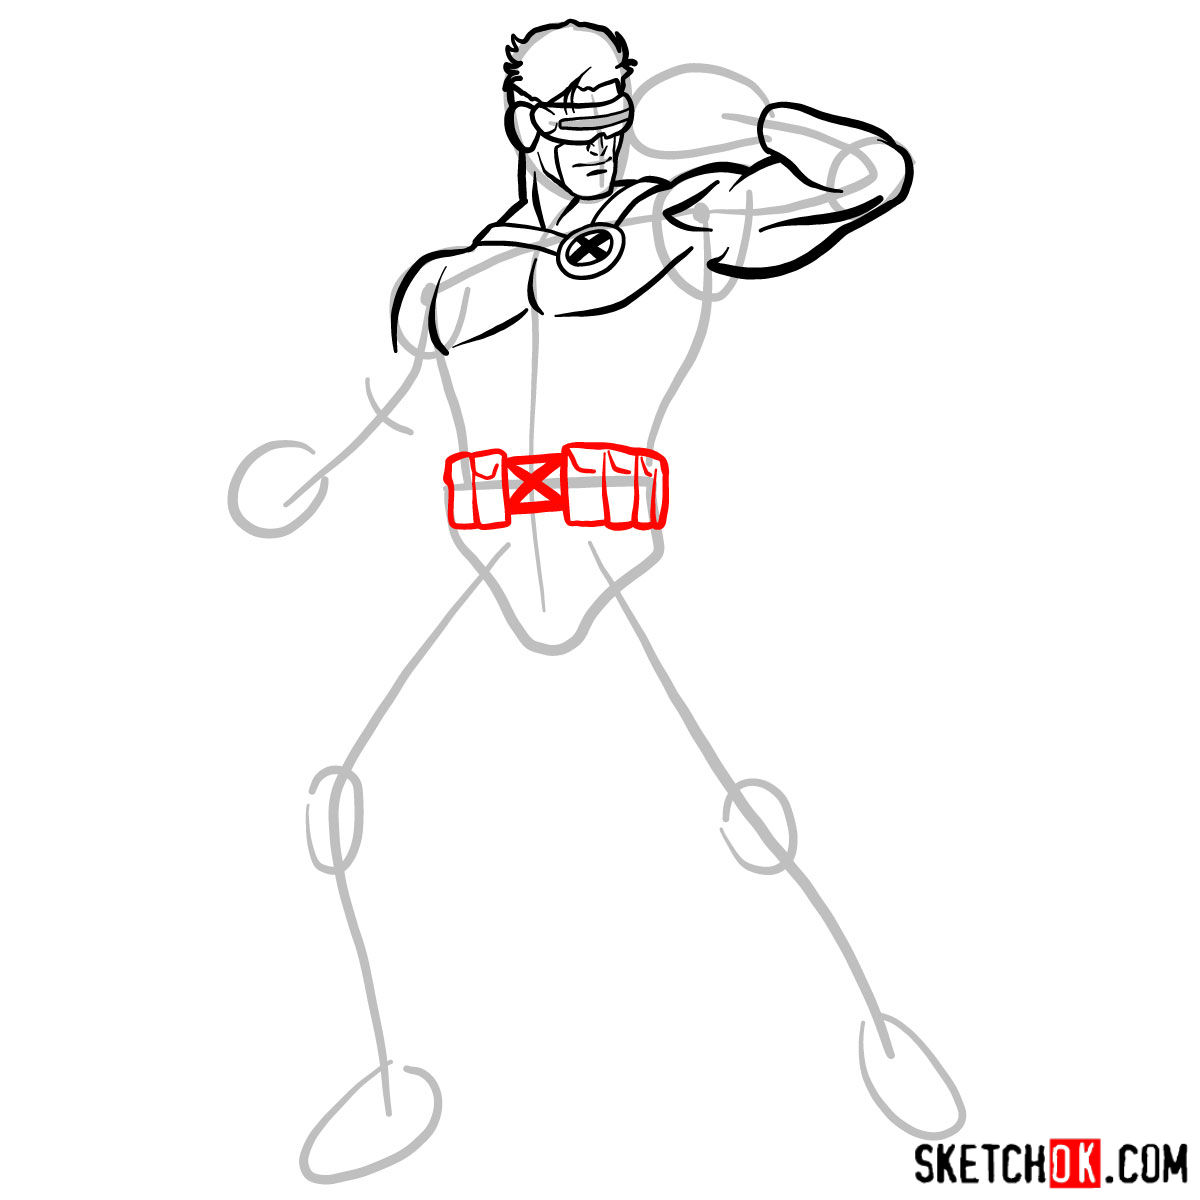 How to draw Cyclops from X-Men - step 09